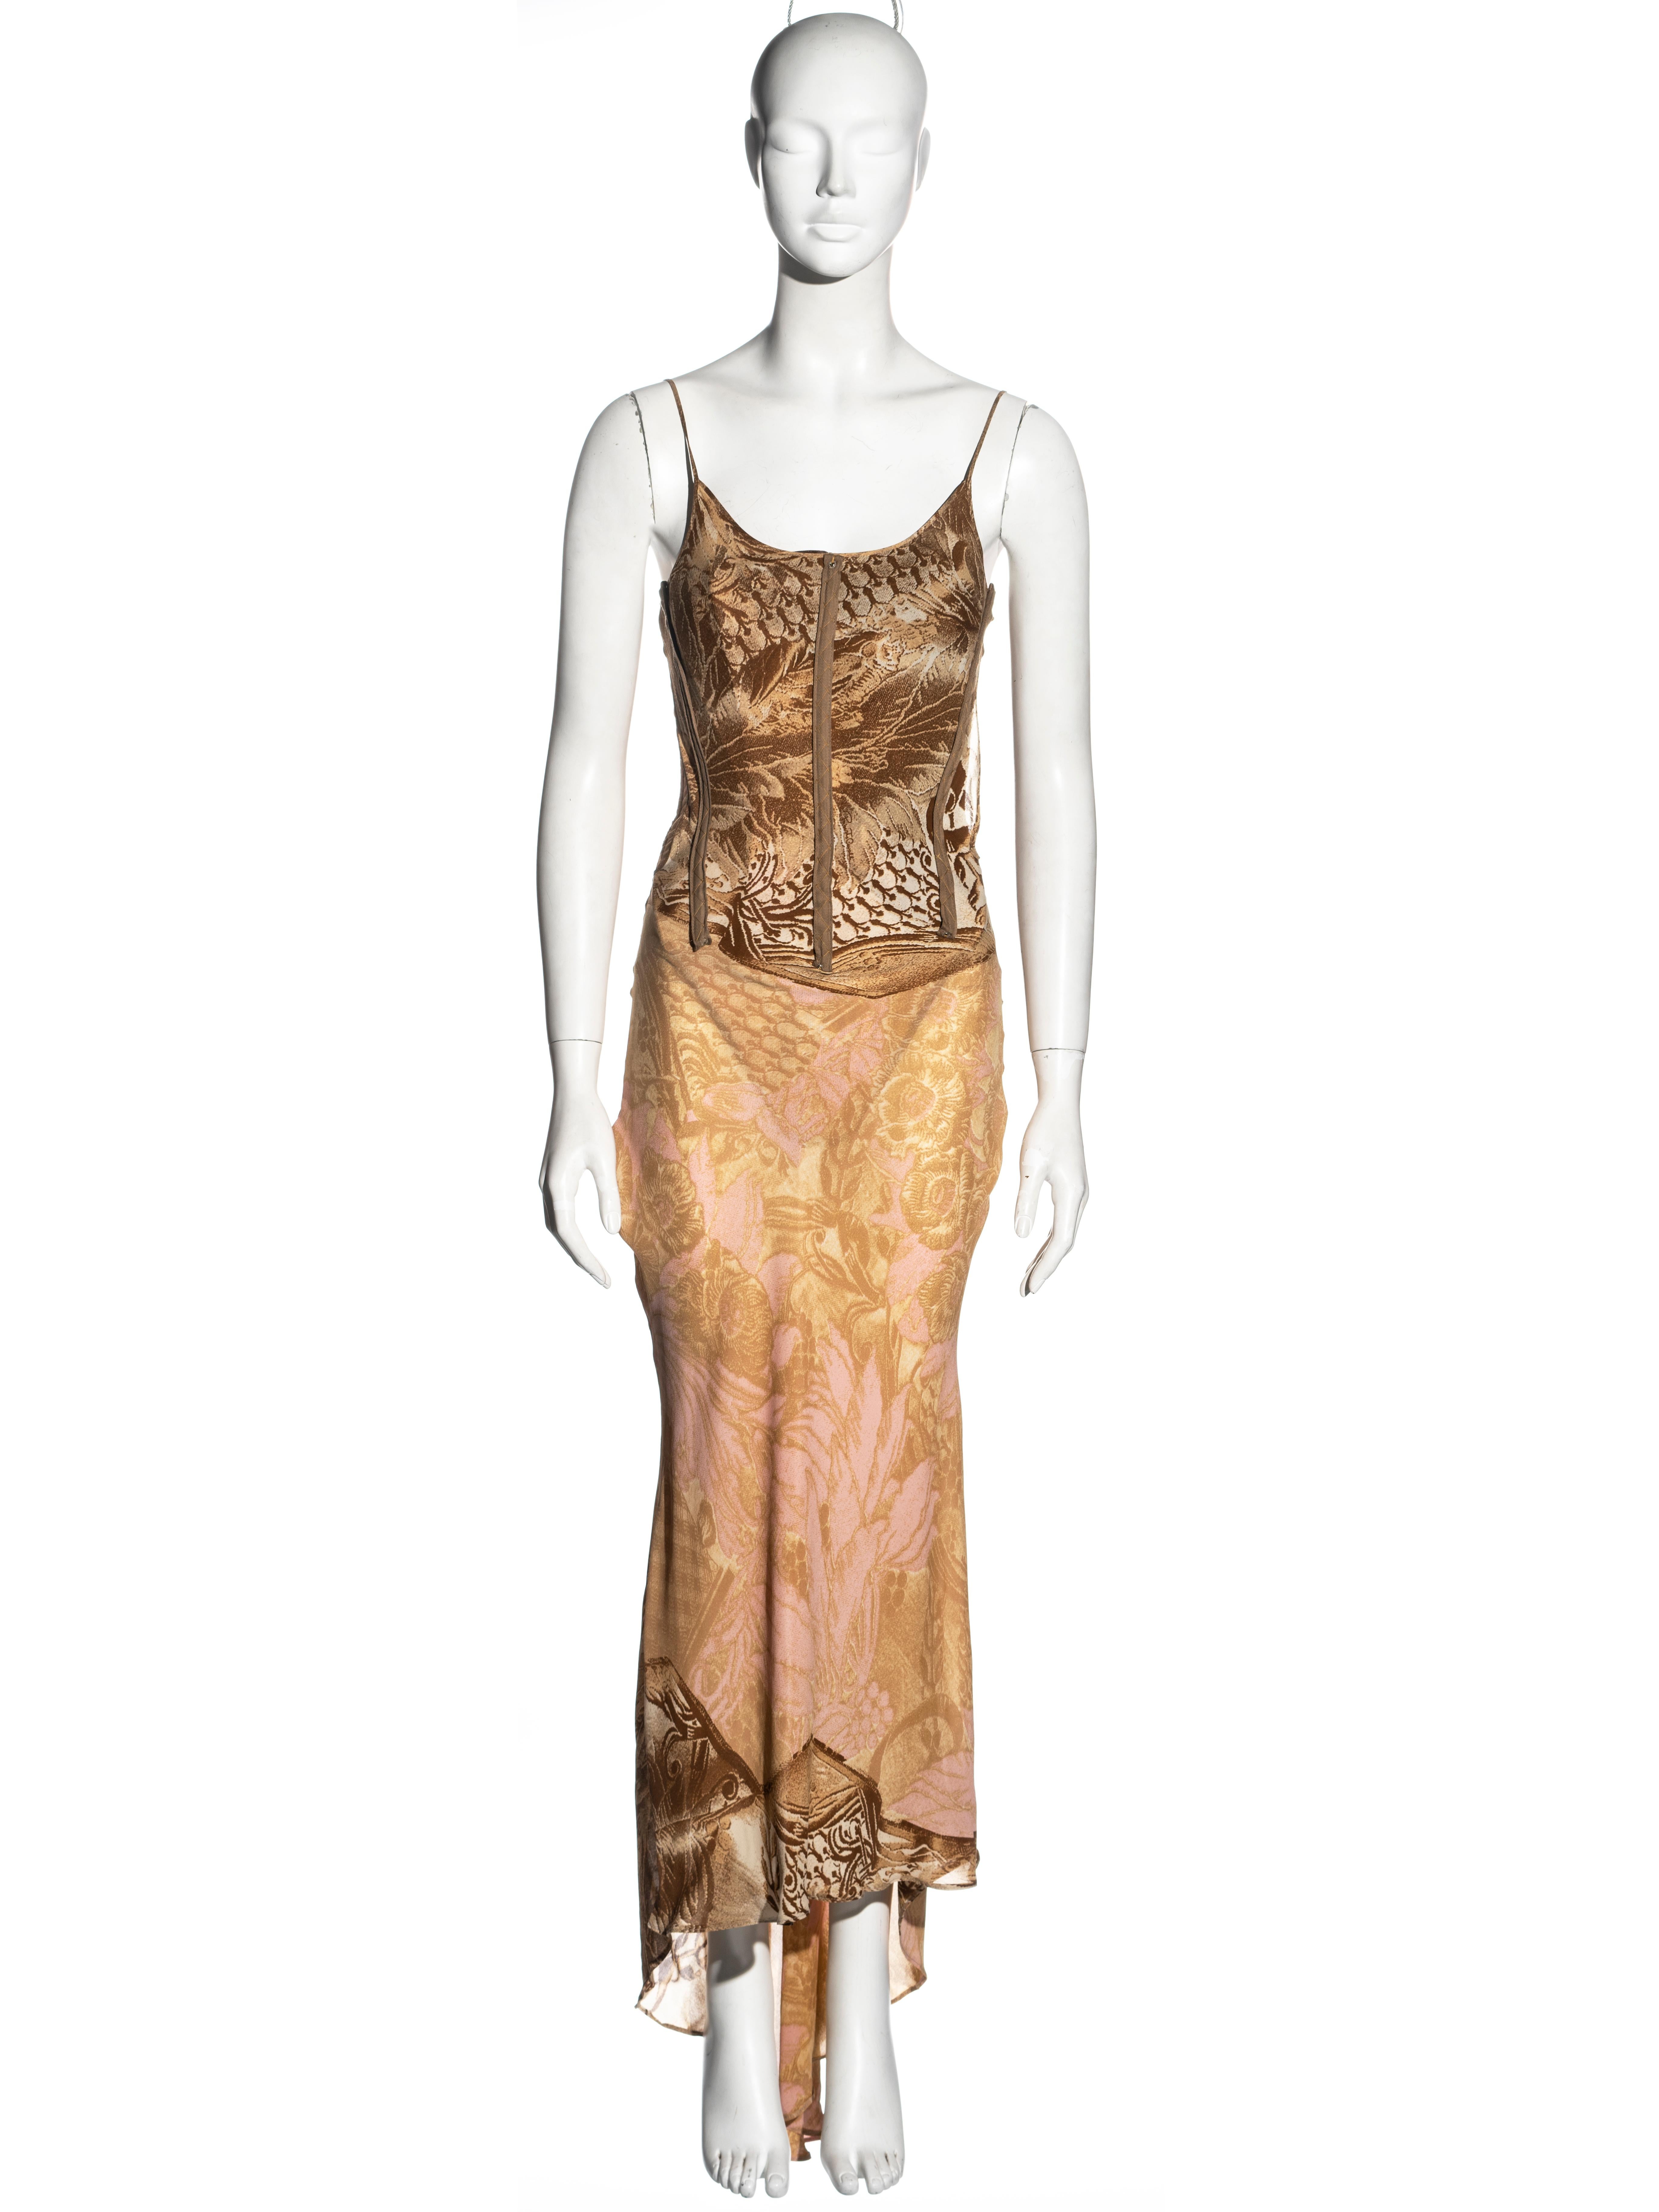 ▪ Roberto Cavalli silk evening dress
▪ Brown and pink montage print 
▪ Corseted bodice with exposed boning tape and nylon mesh overlay
▪ Built-in bodysuit 
▪ Spaghetti straps 
▪ Asymmetric hemline
▪ Size XS / S
▪ Fall-Winter 2001
▪ Made in Italy